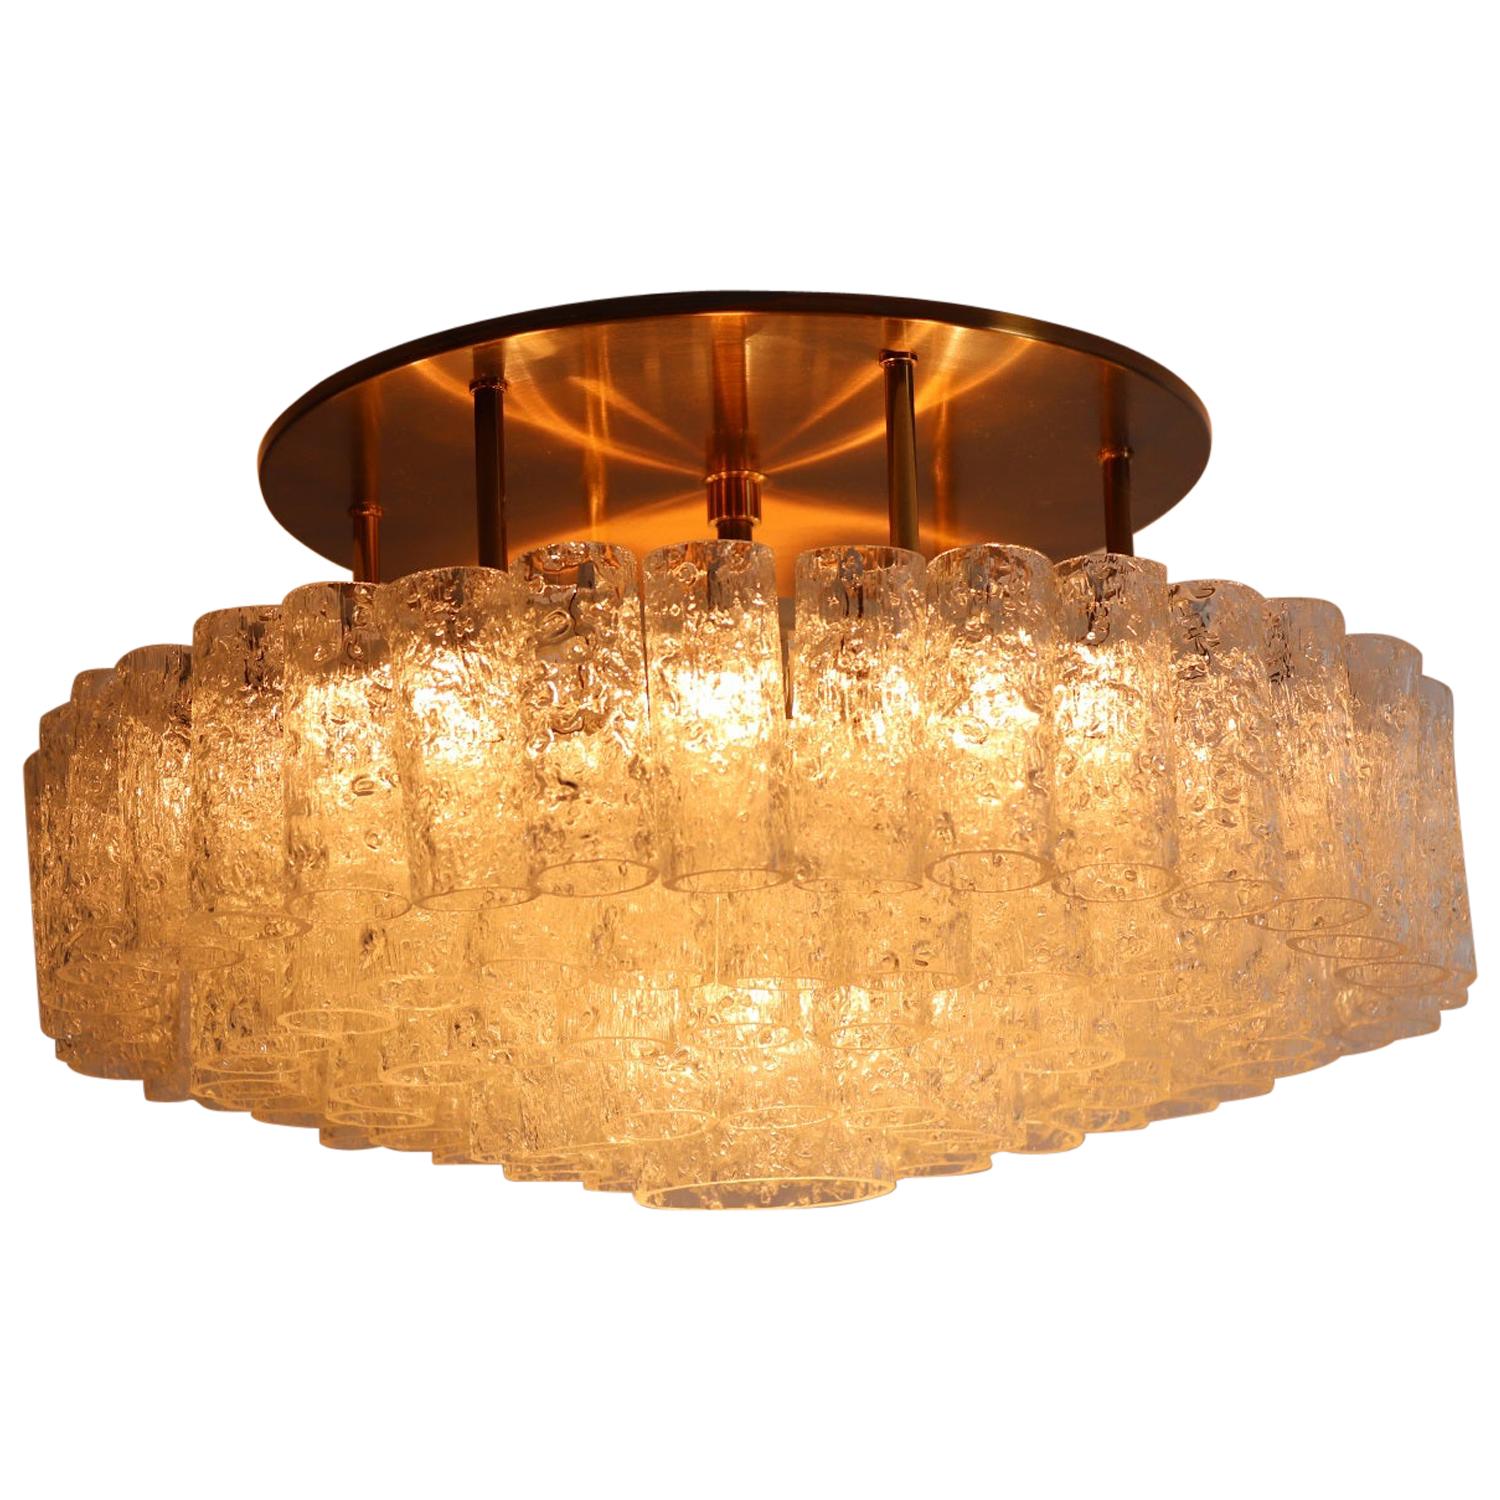 Midcentury Glass and Brass Flush Mount Chandelier by Doria Germany, 1960s